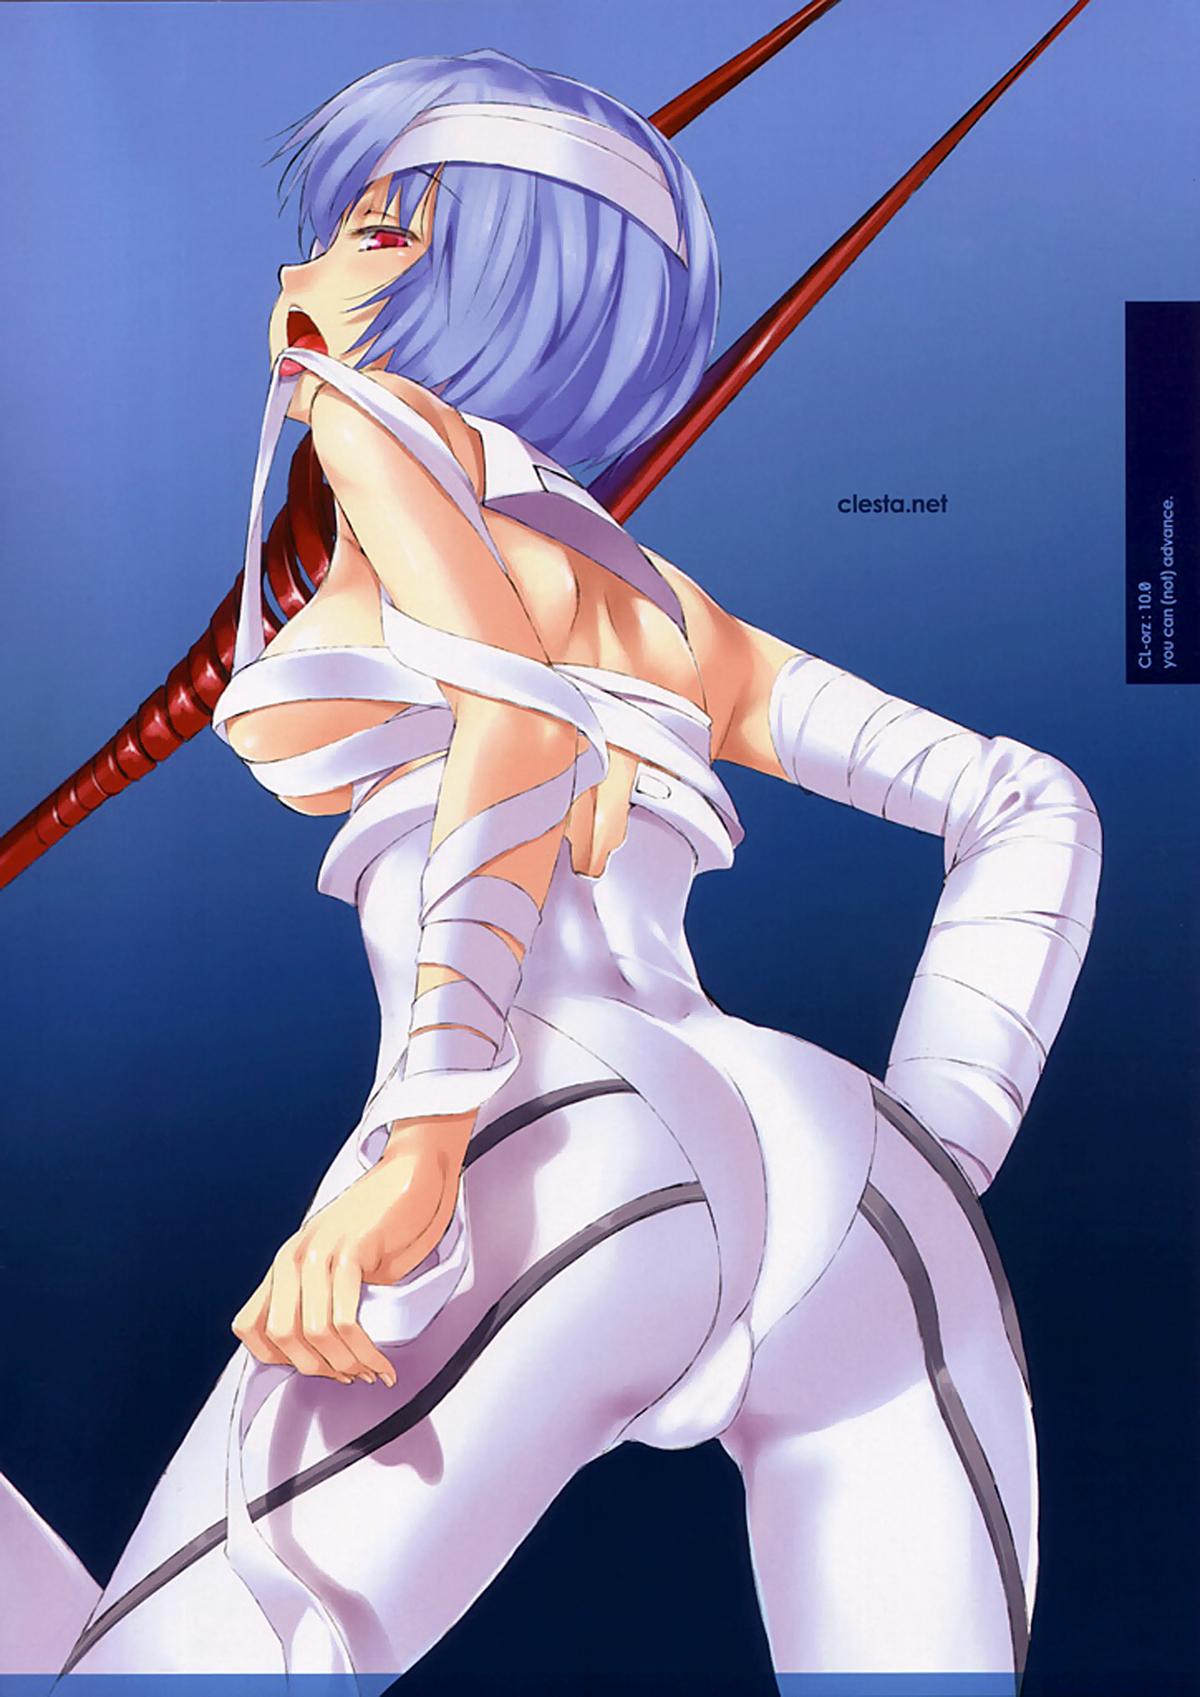 (SC48) [Clesta (Cle Masahiro)] CL-orz: 10.0 - you can (not) advance (Rebuild of Evangelion) [Decensored] 15